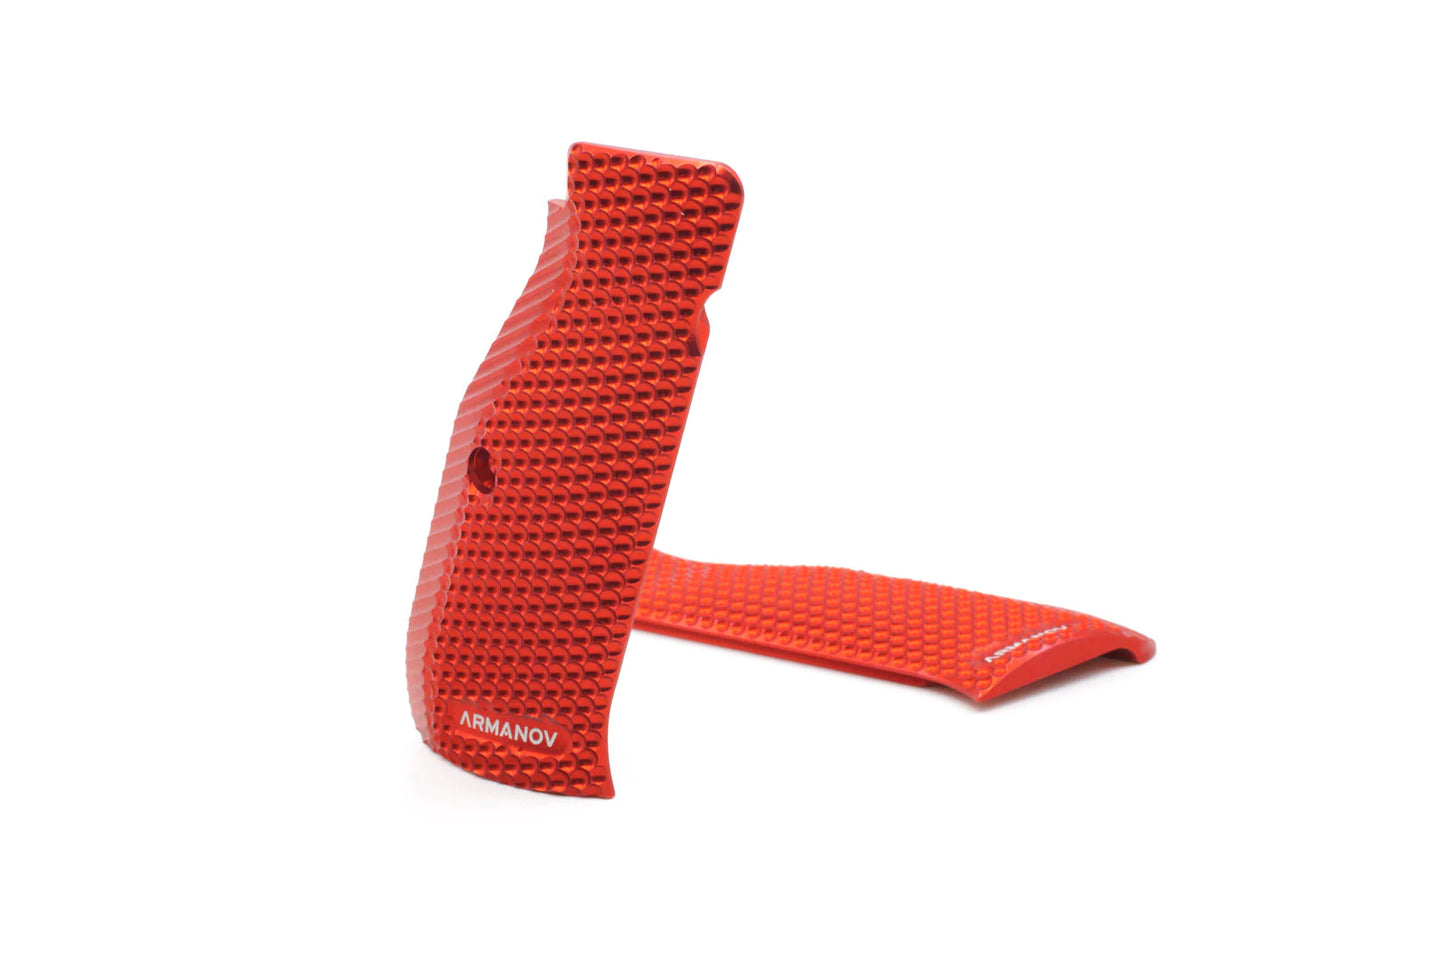 Open Box - SpidErgo Gen2 Pistol Grips for CZ Shadow 2, SP01, TS, TS2 and 75 series